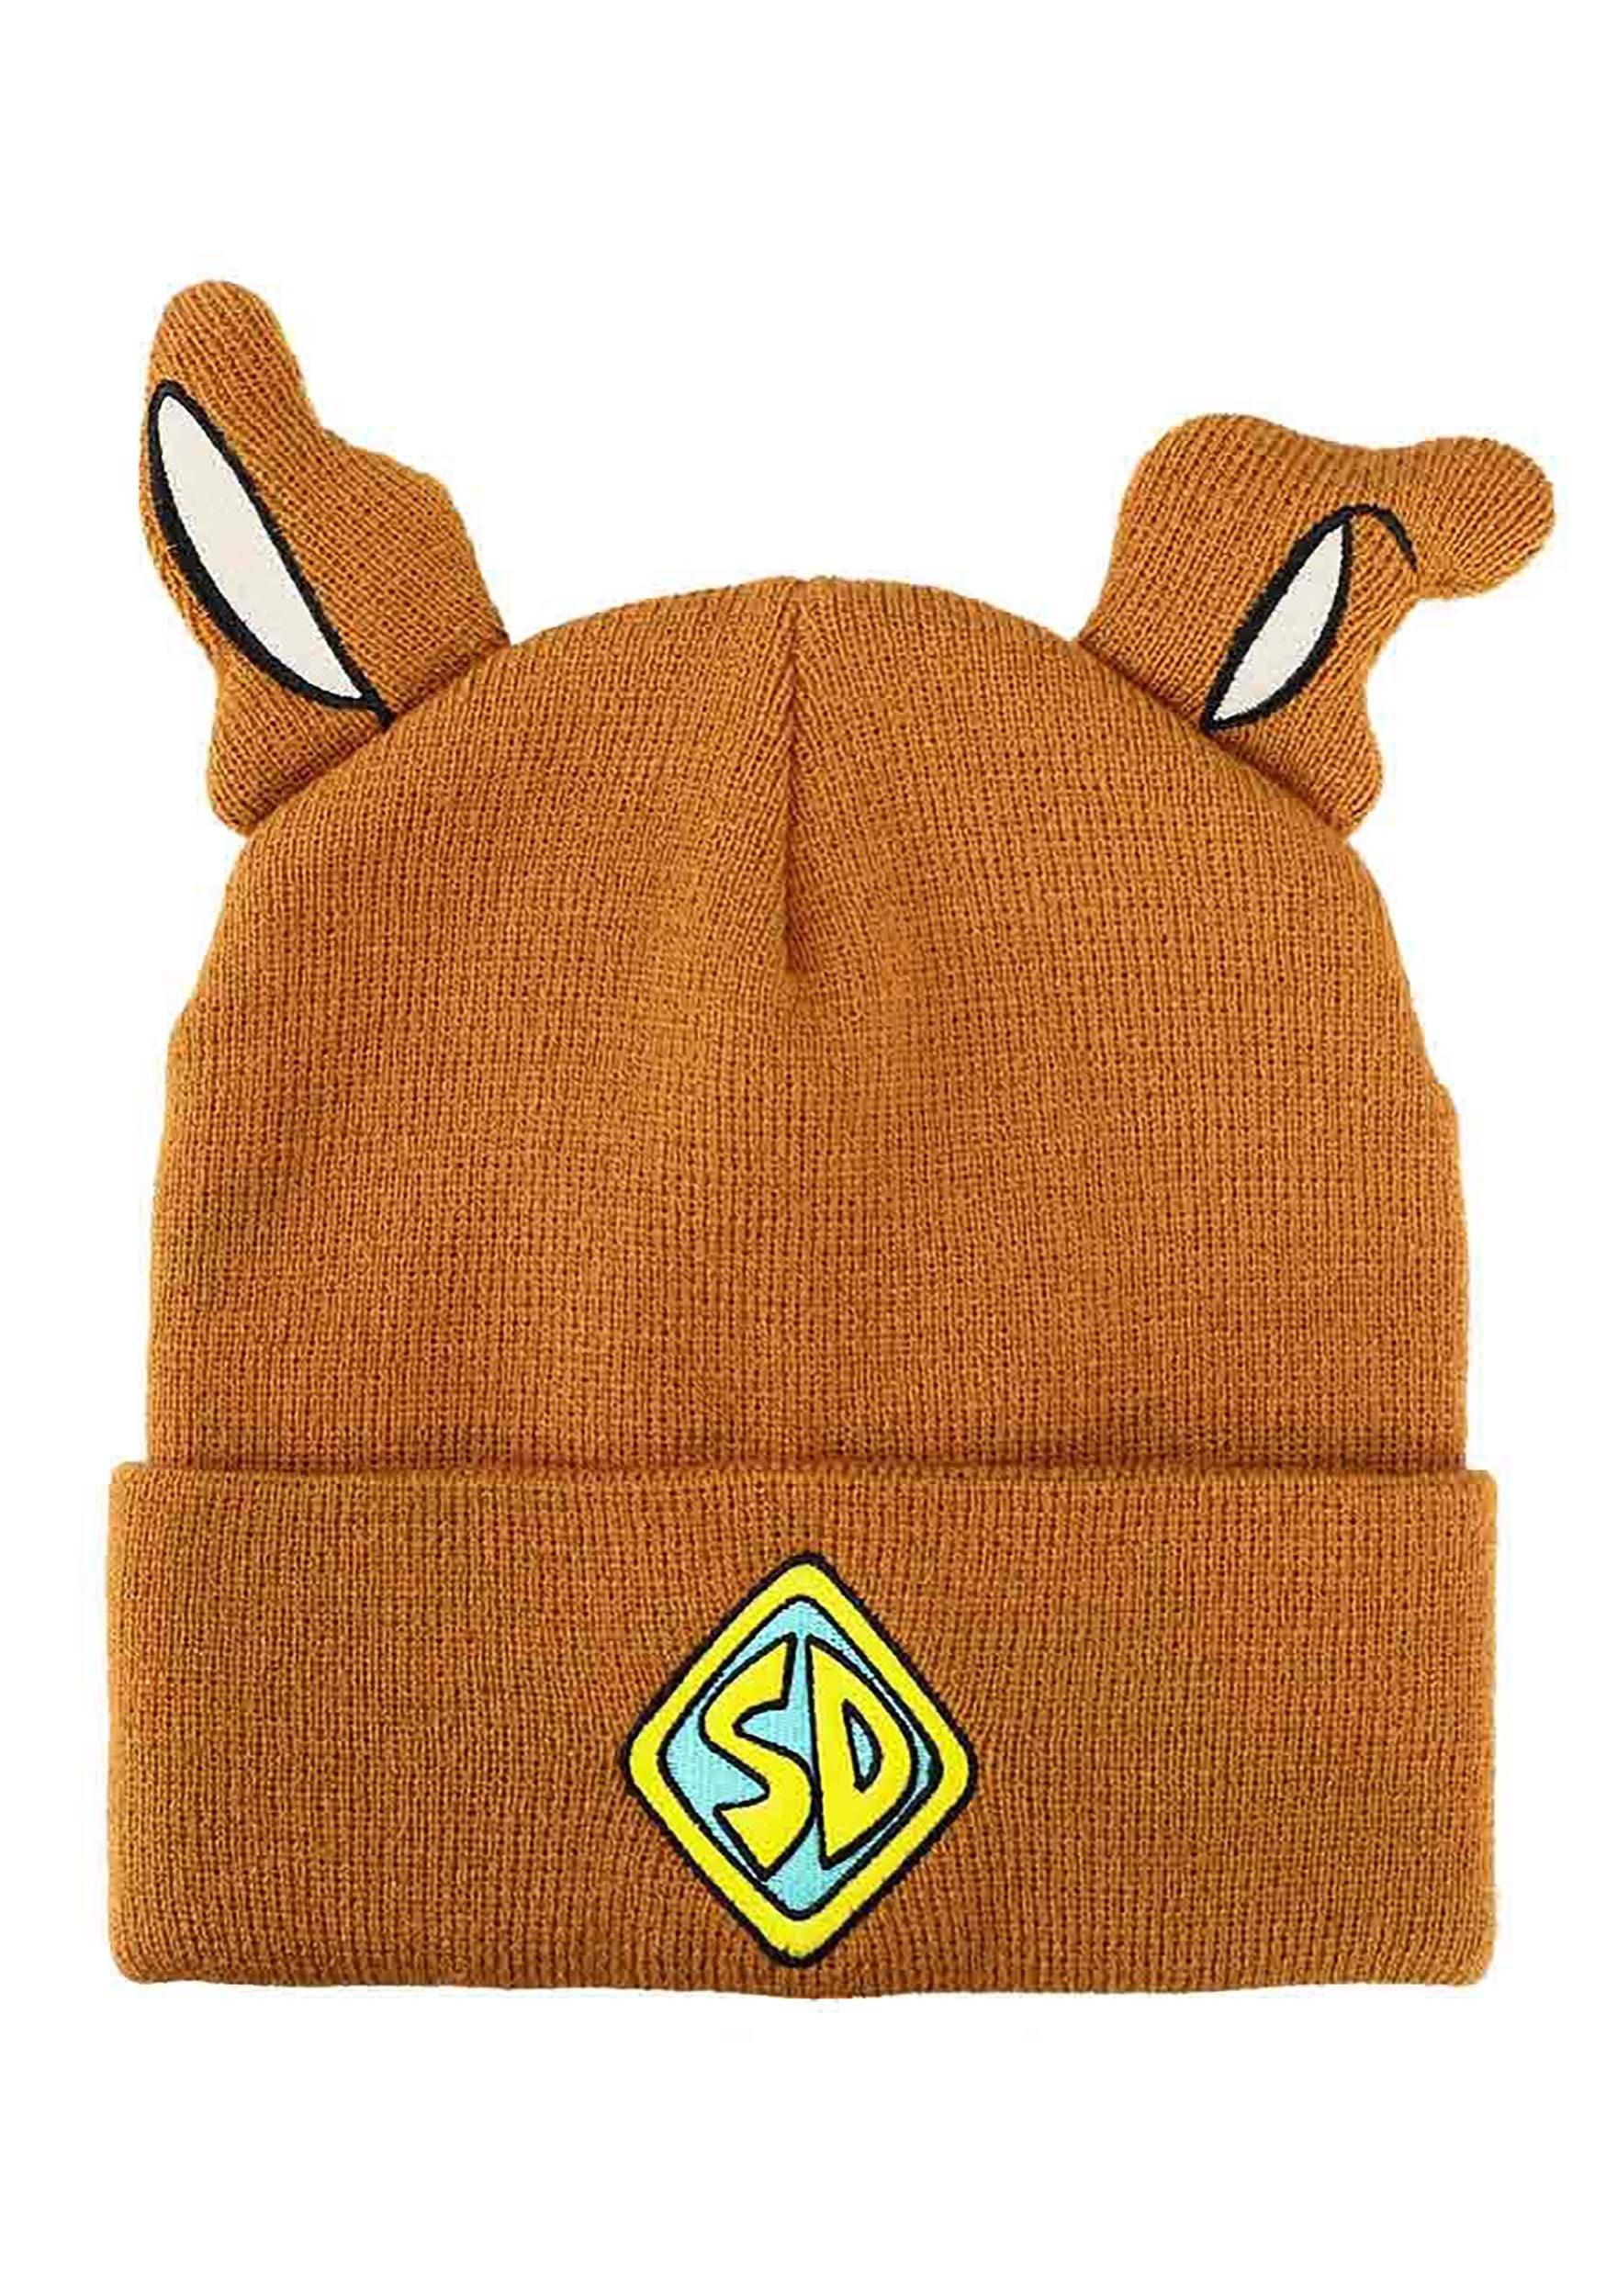 Scooby Doo Plush Ears Embroidered Beanie , Scooby Doo Apparel